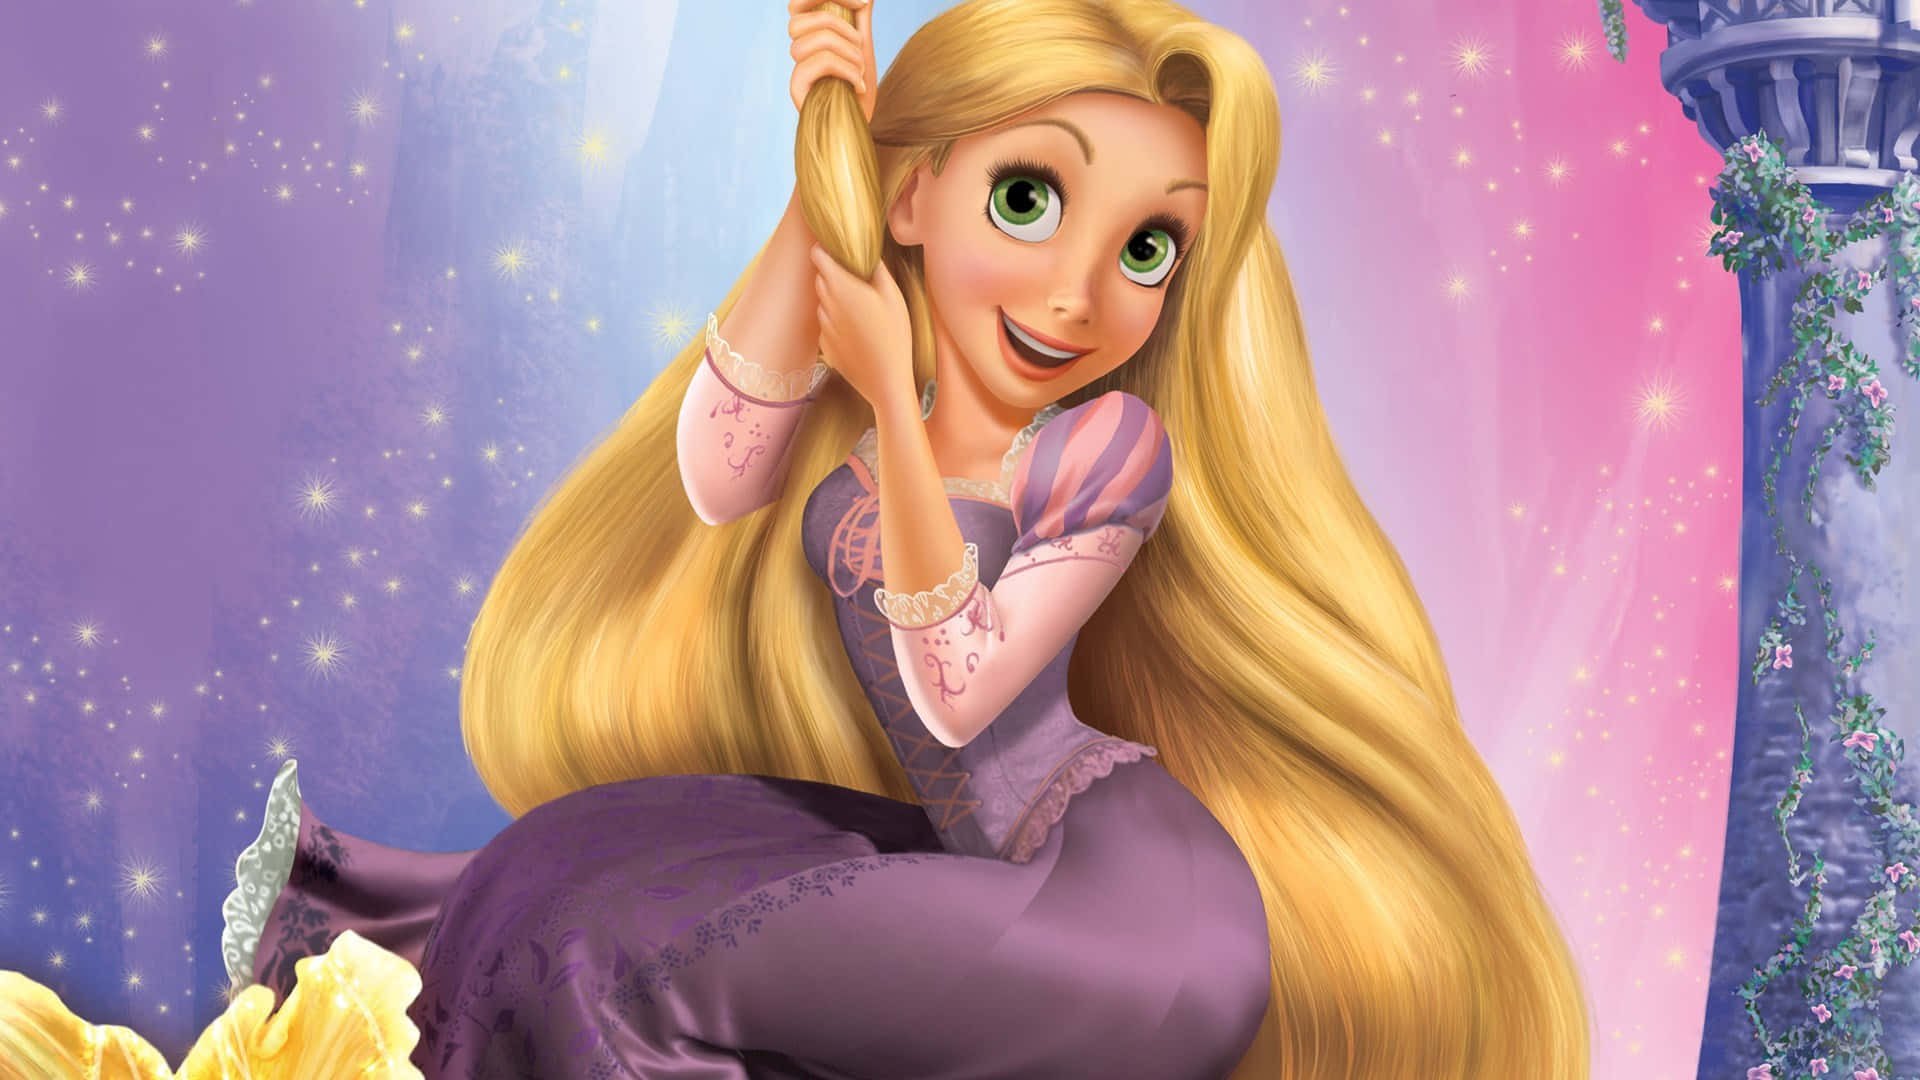 Rapunzel staring off into the distance from her home in the Tangled tower